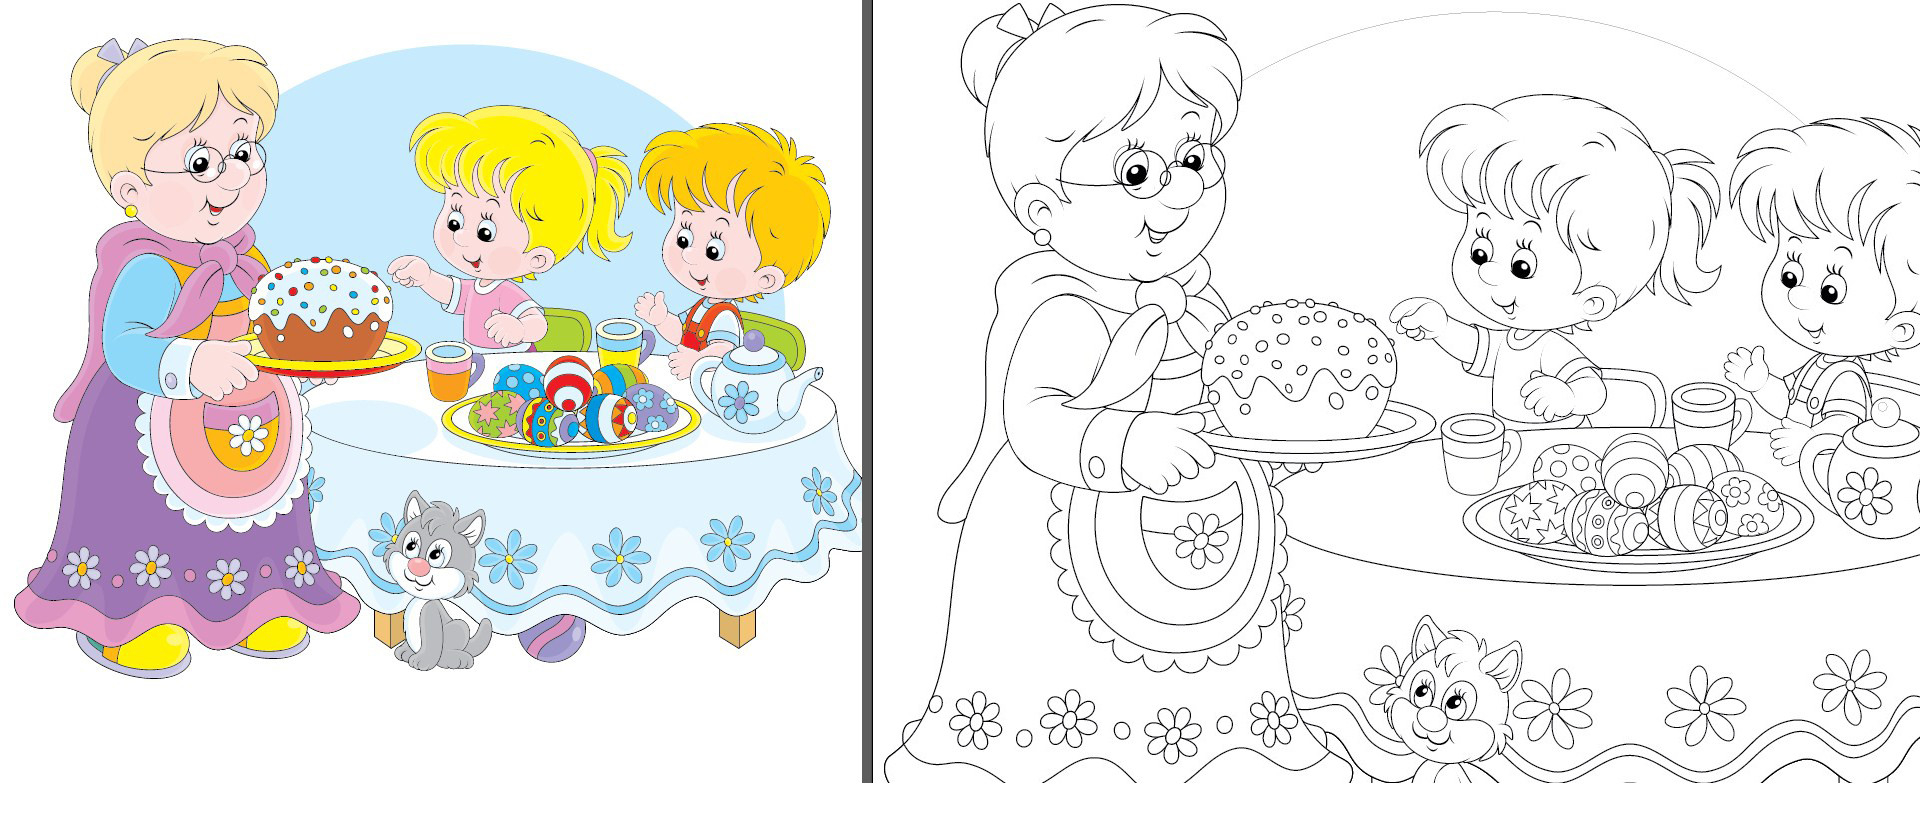 Convert Pictures To Coloring Pages Adobe Illustrator Converting A Colored Vector Eps To Coloring Page